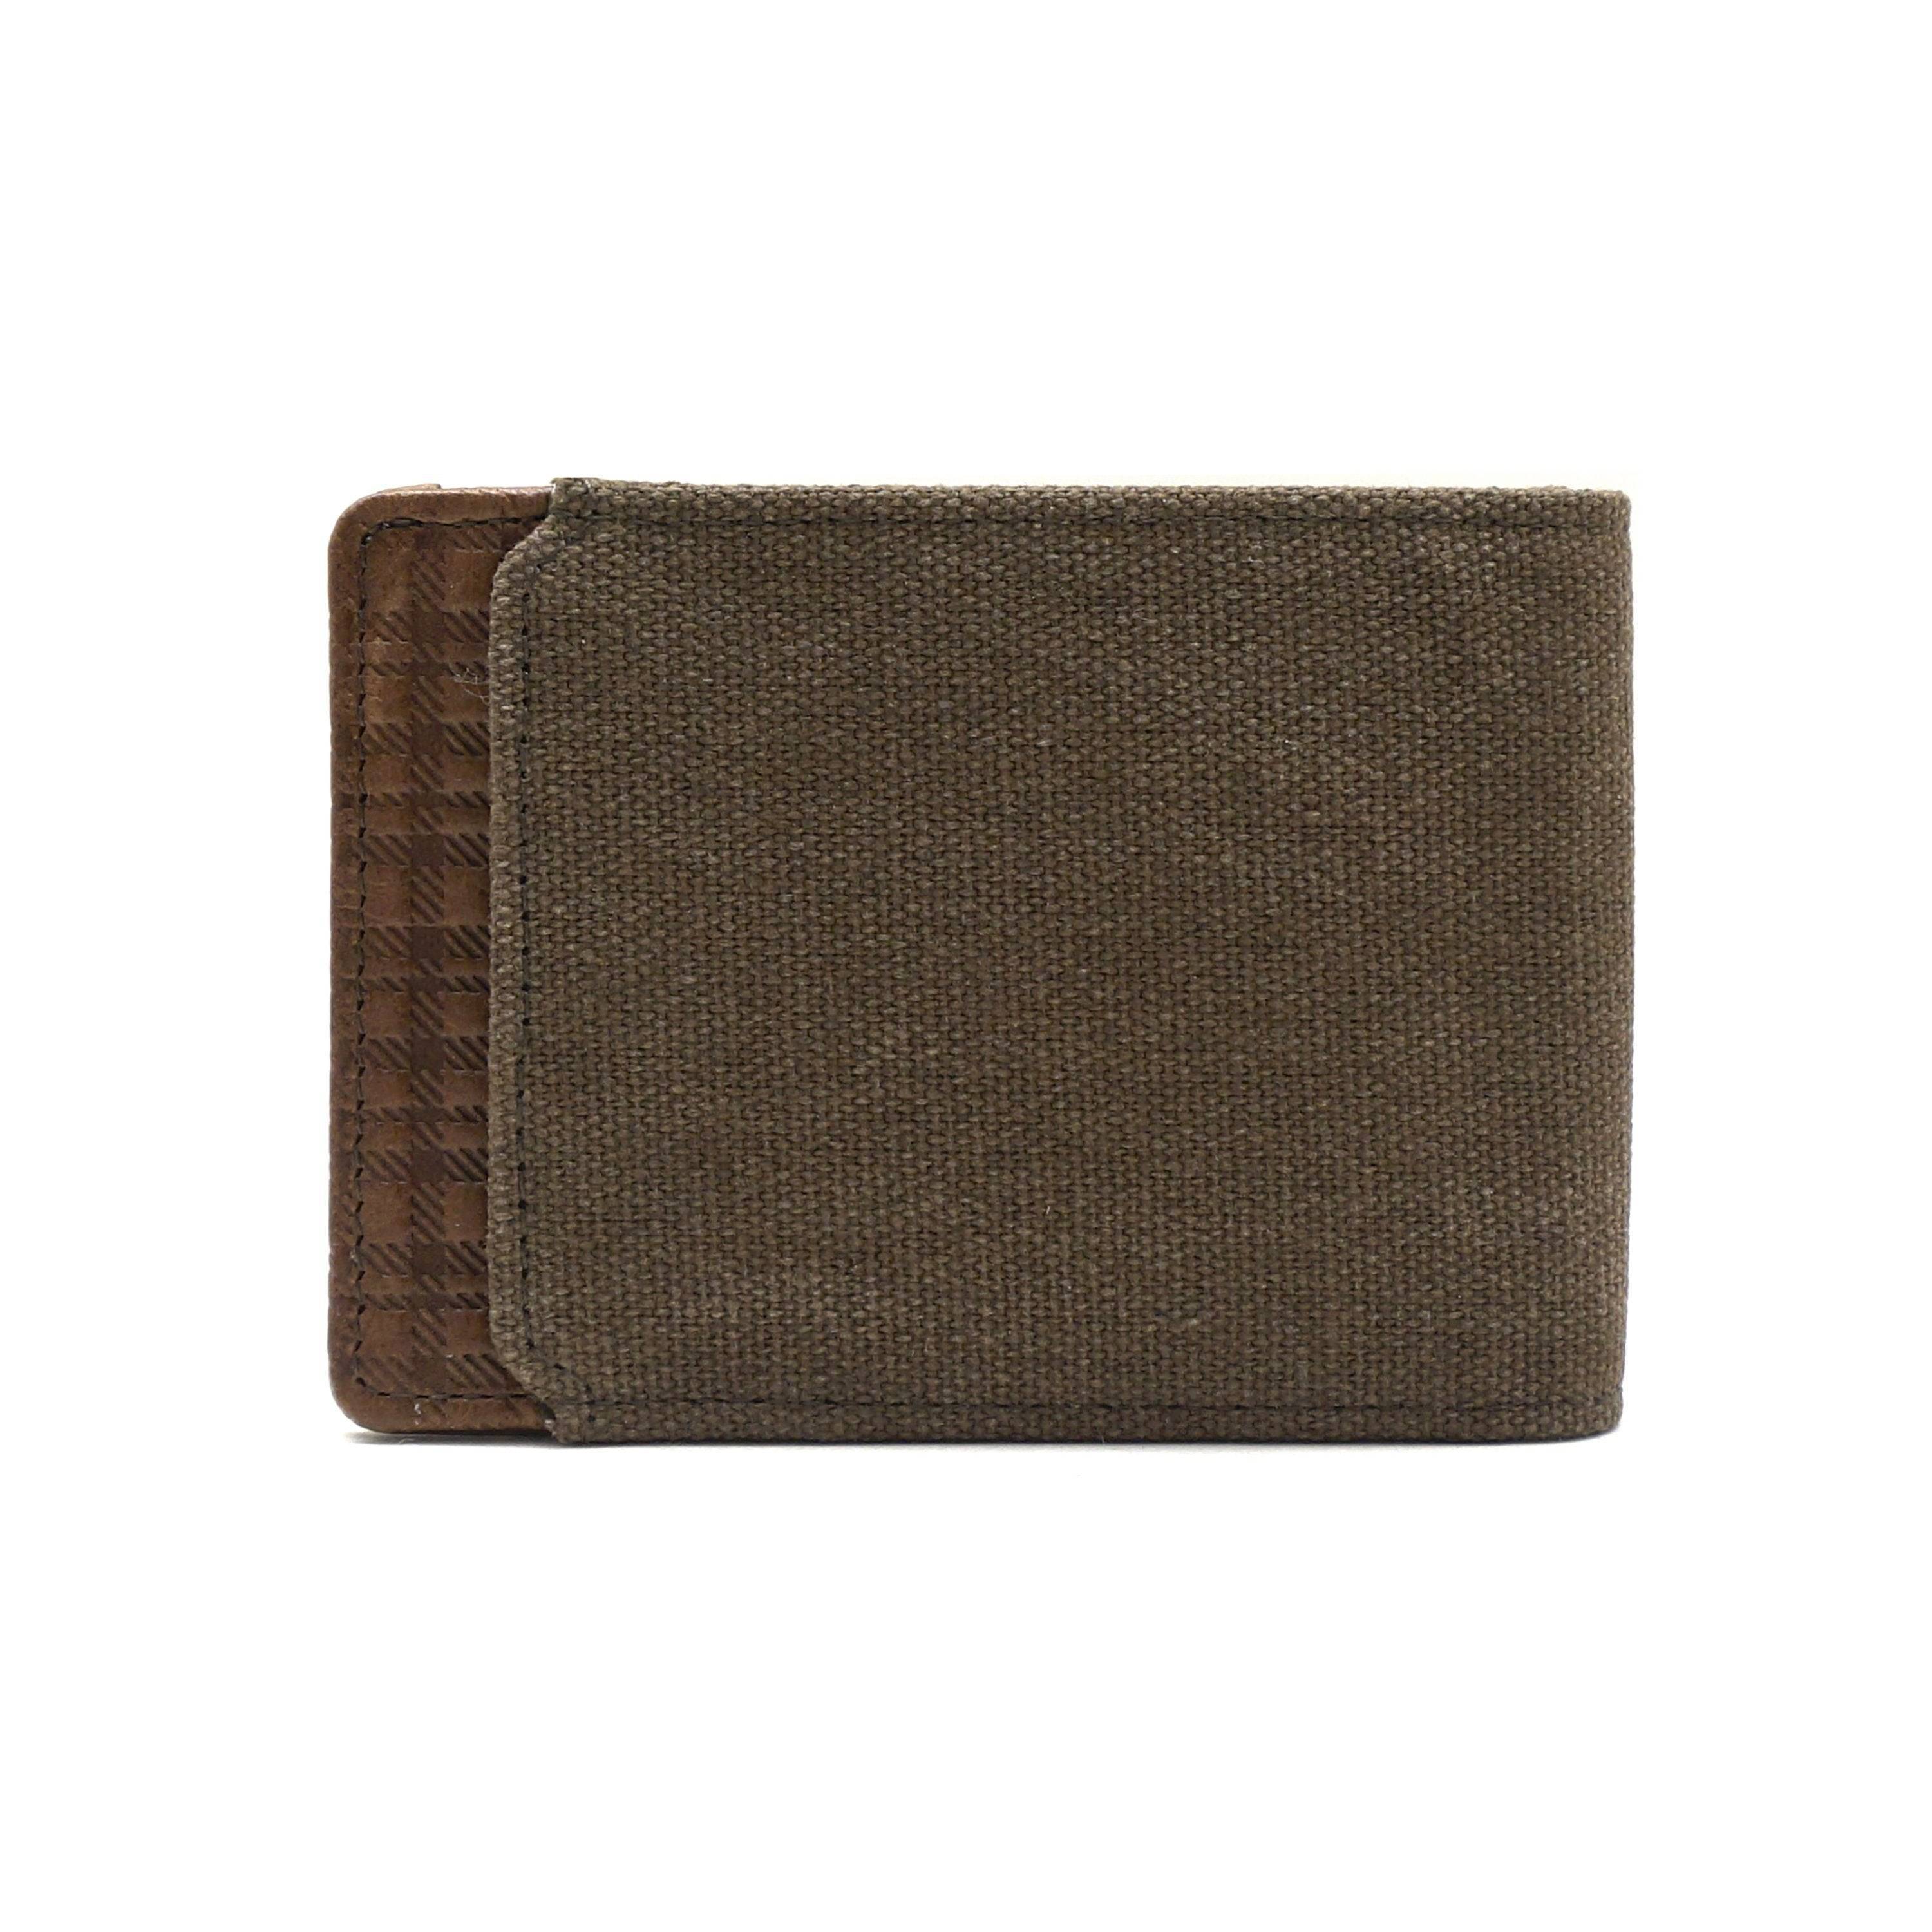 canvas leather wallet